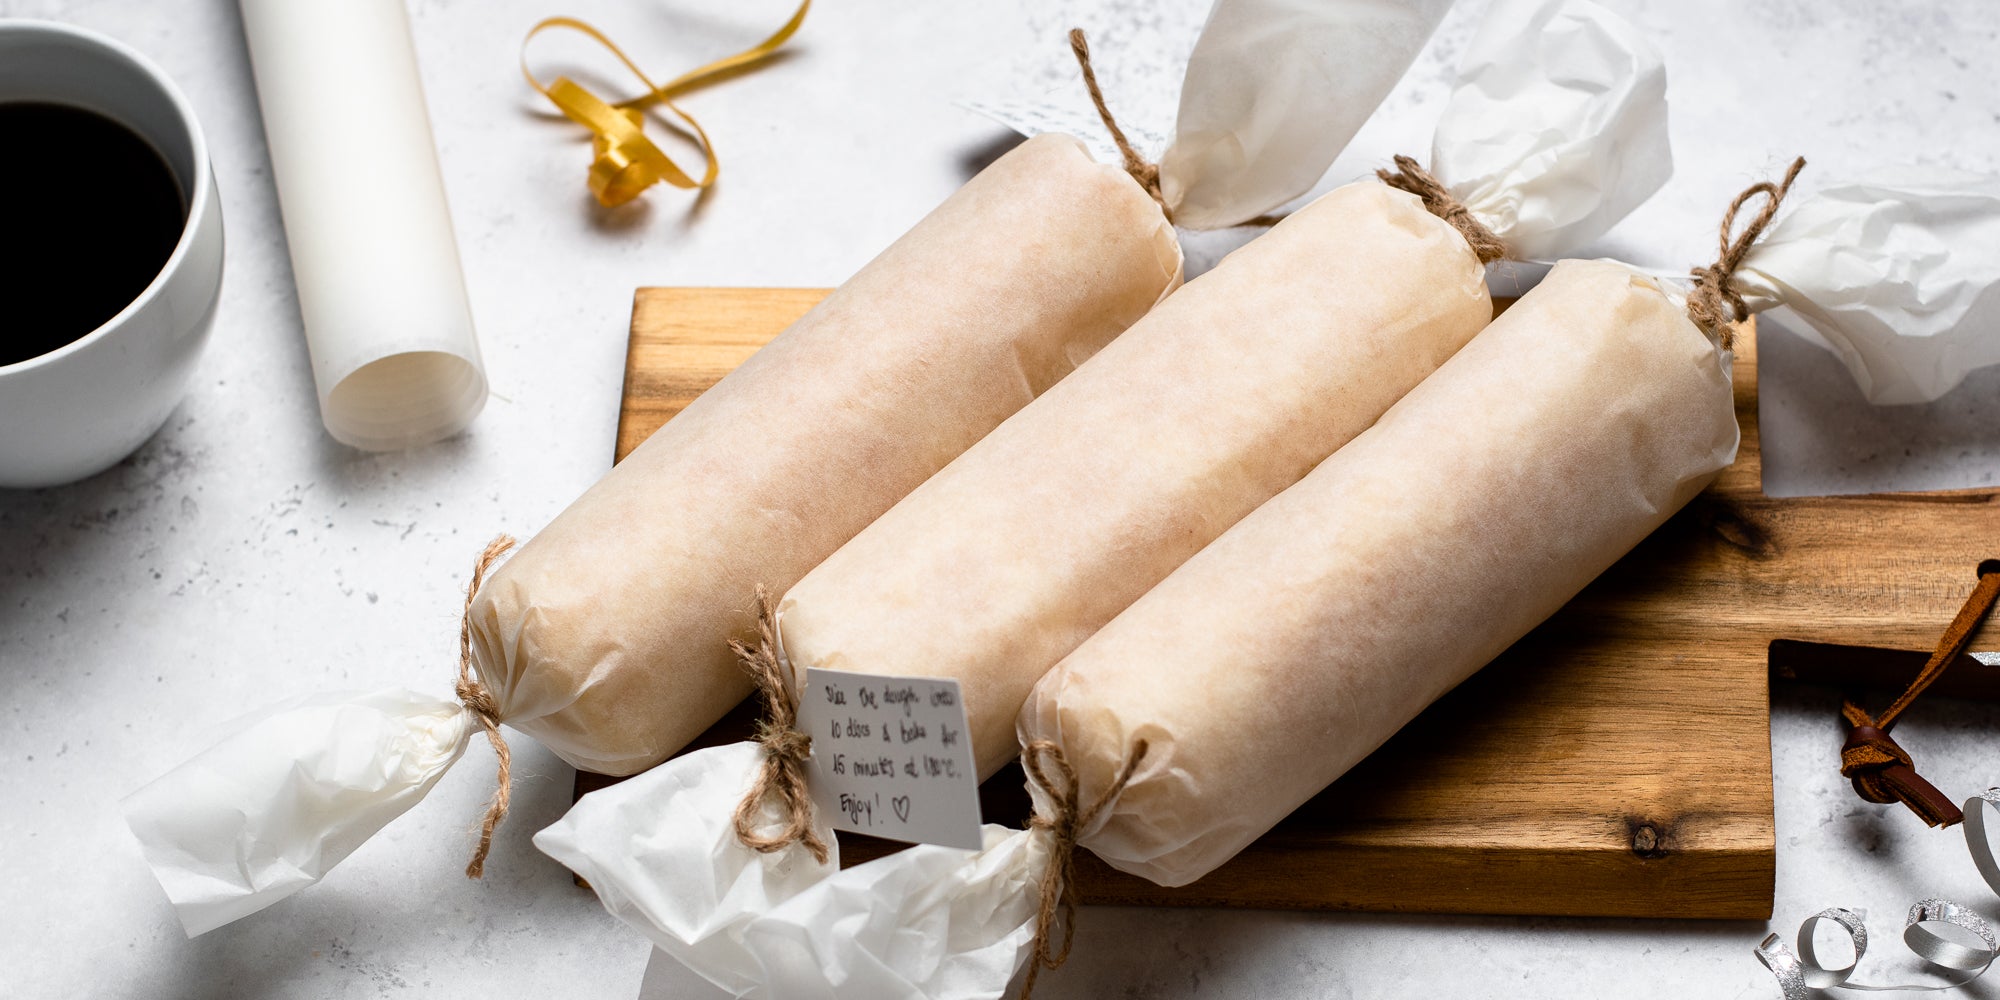 Vegan shortbread wrapped up as a Christmas gift